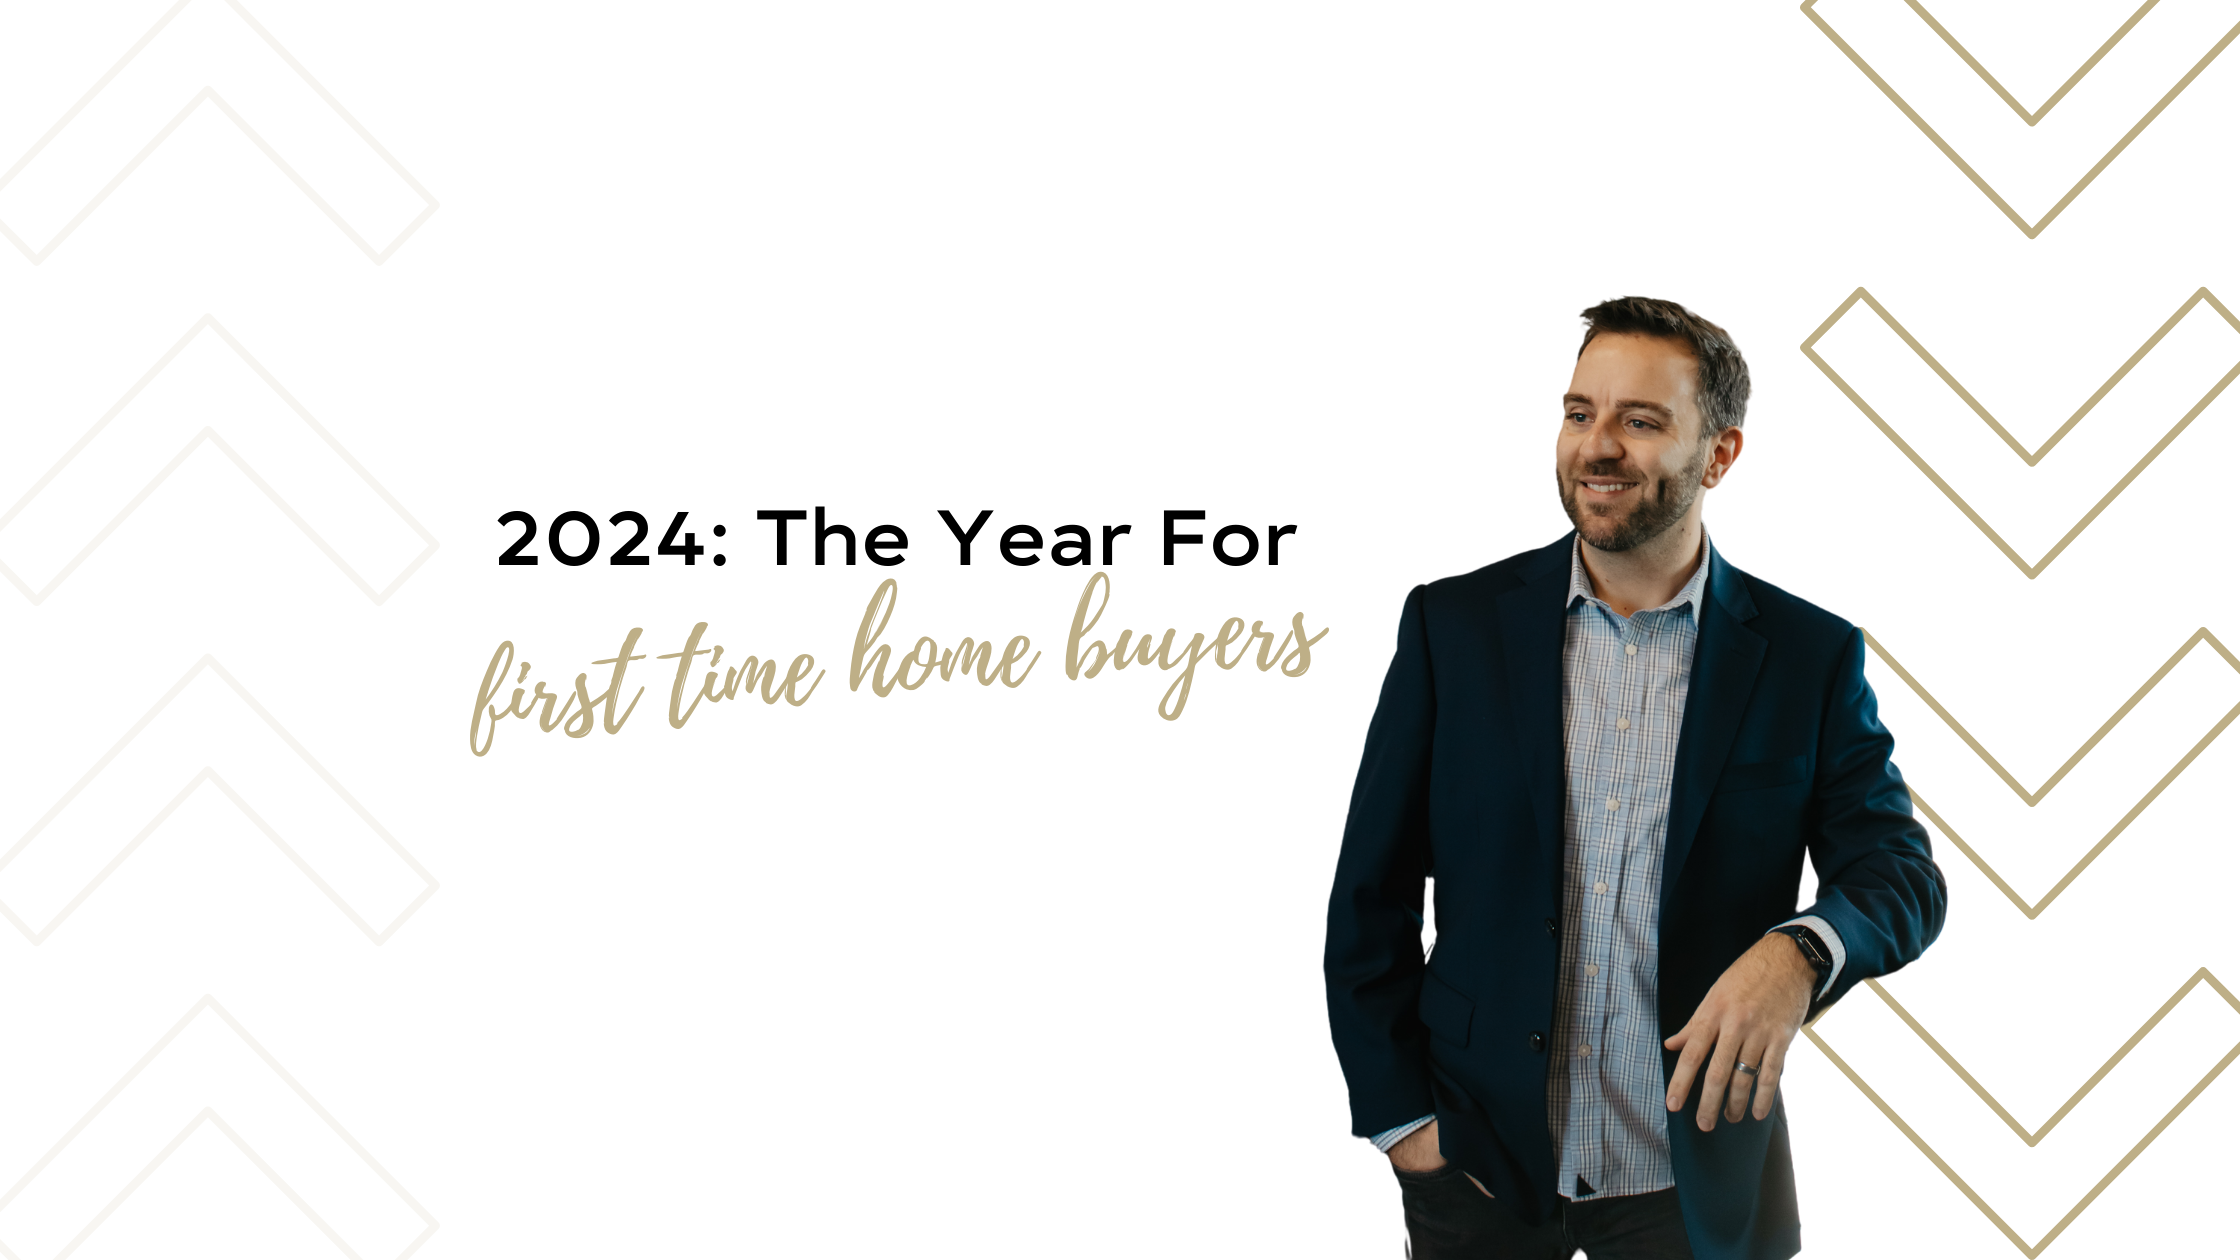 2024: The Year For First Time Home Buyers